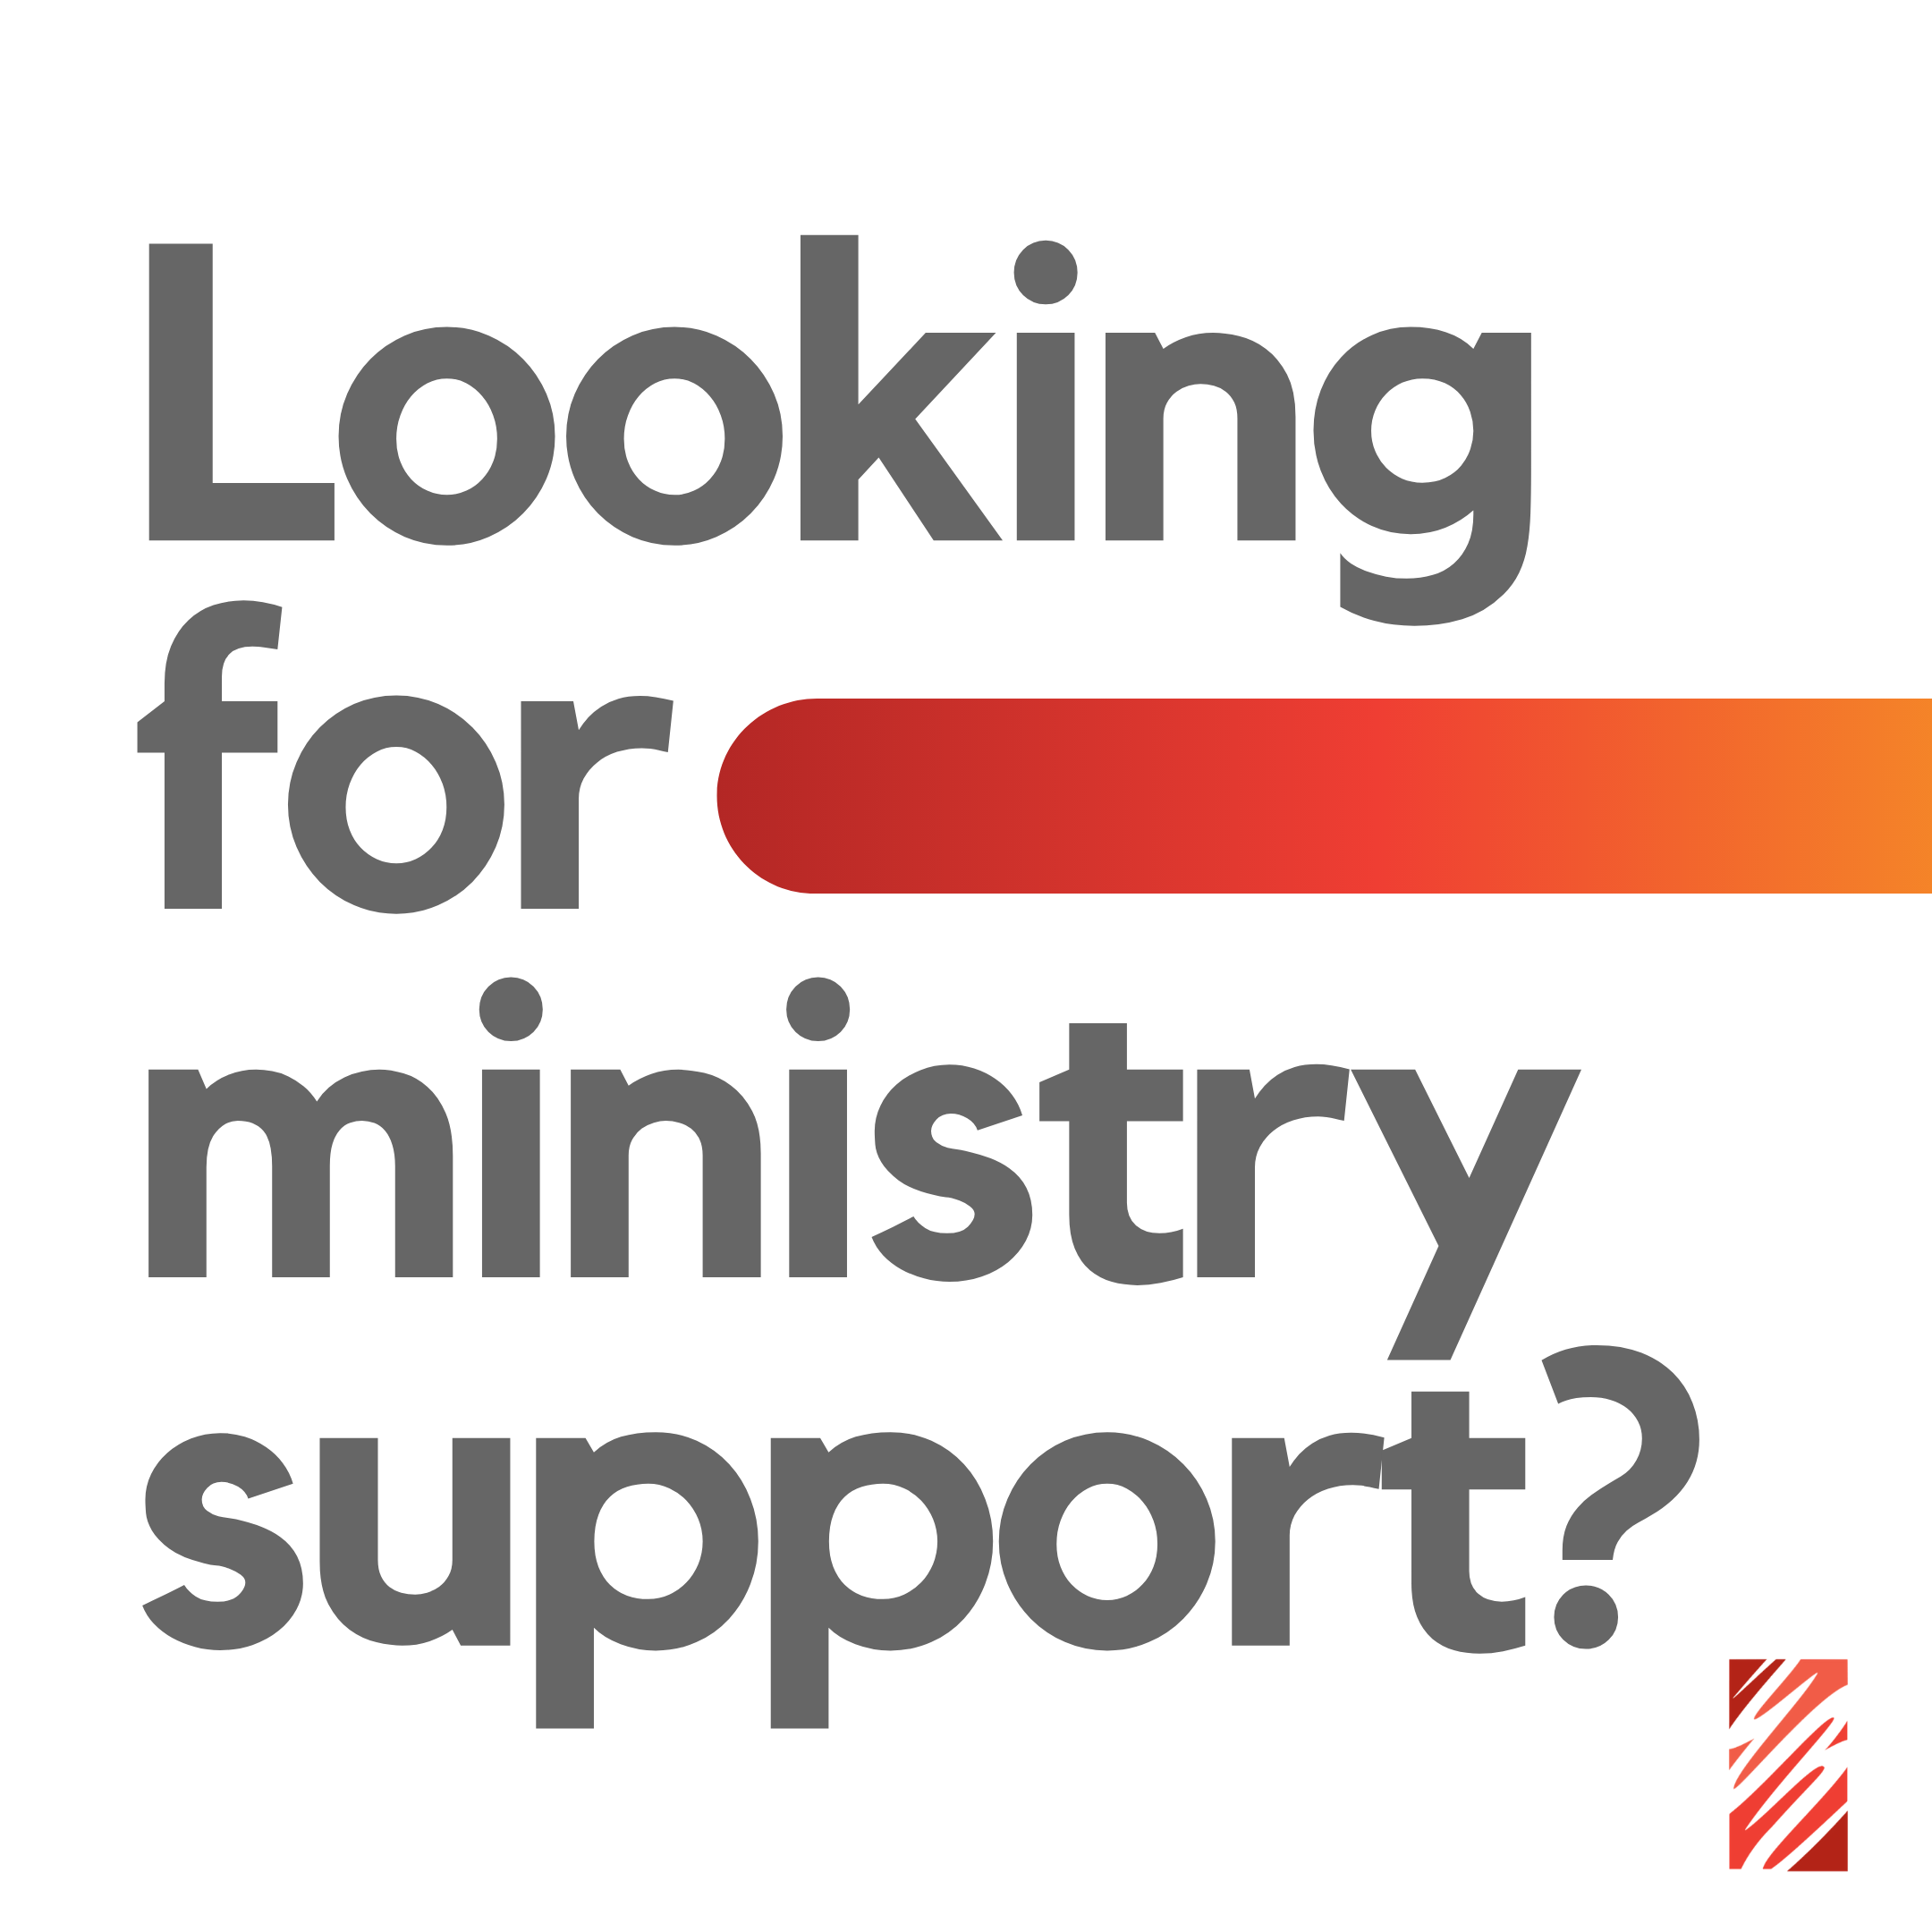 Youth Ministry Coaching Ad